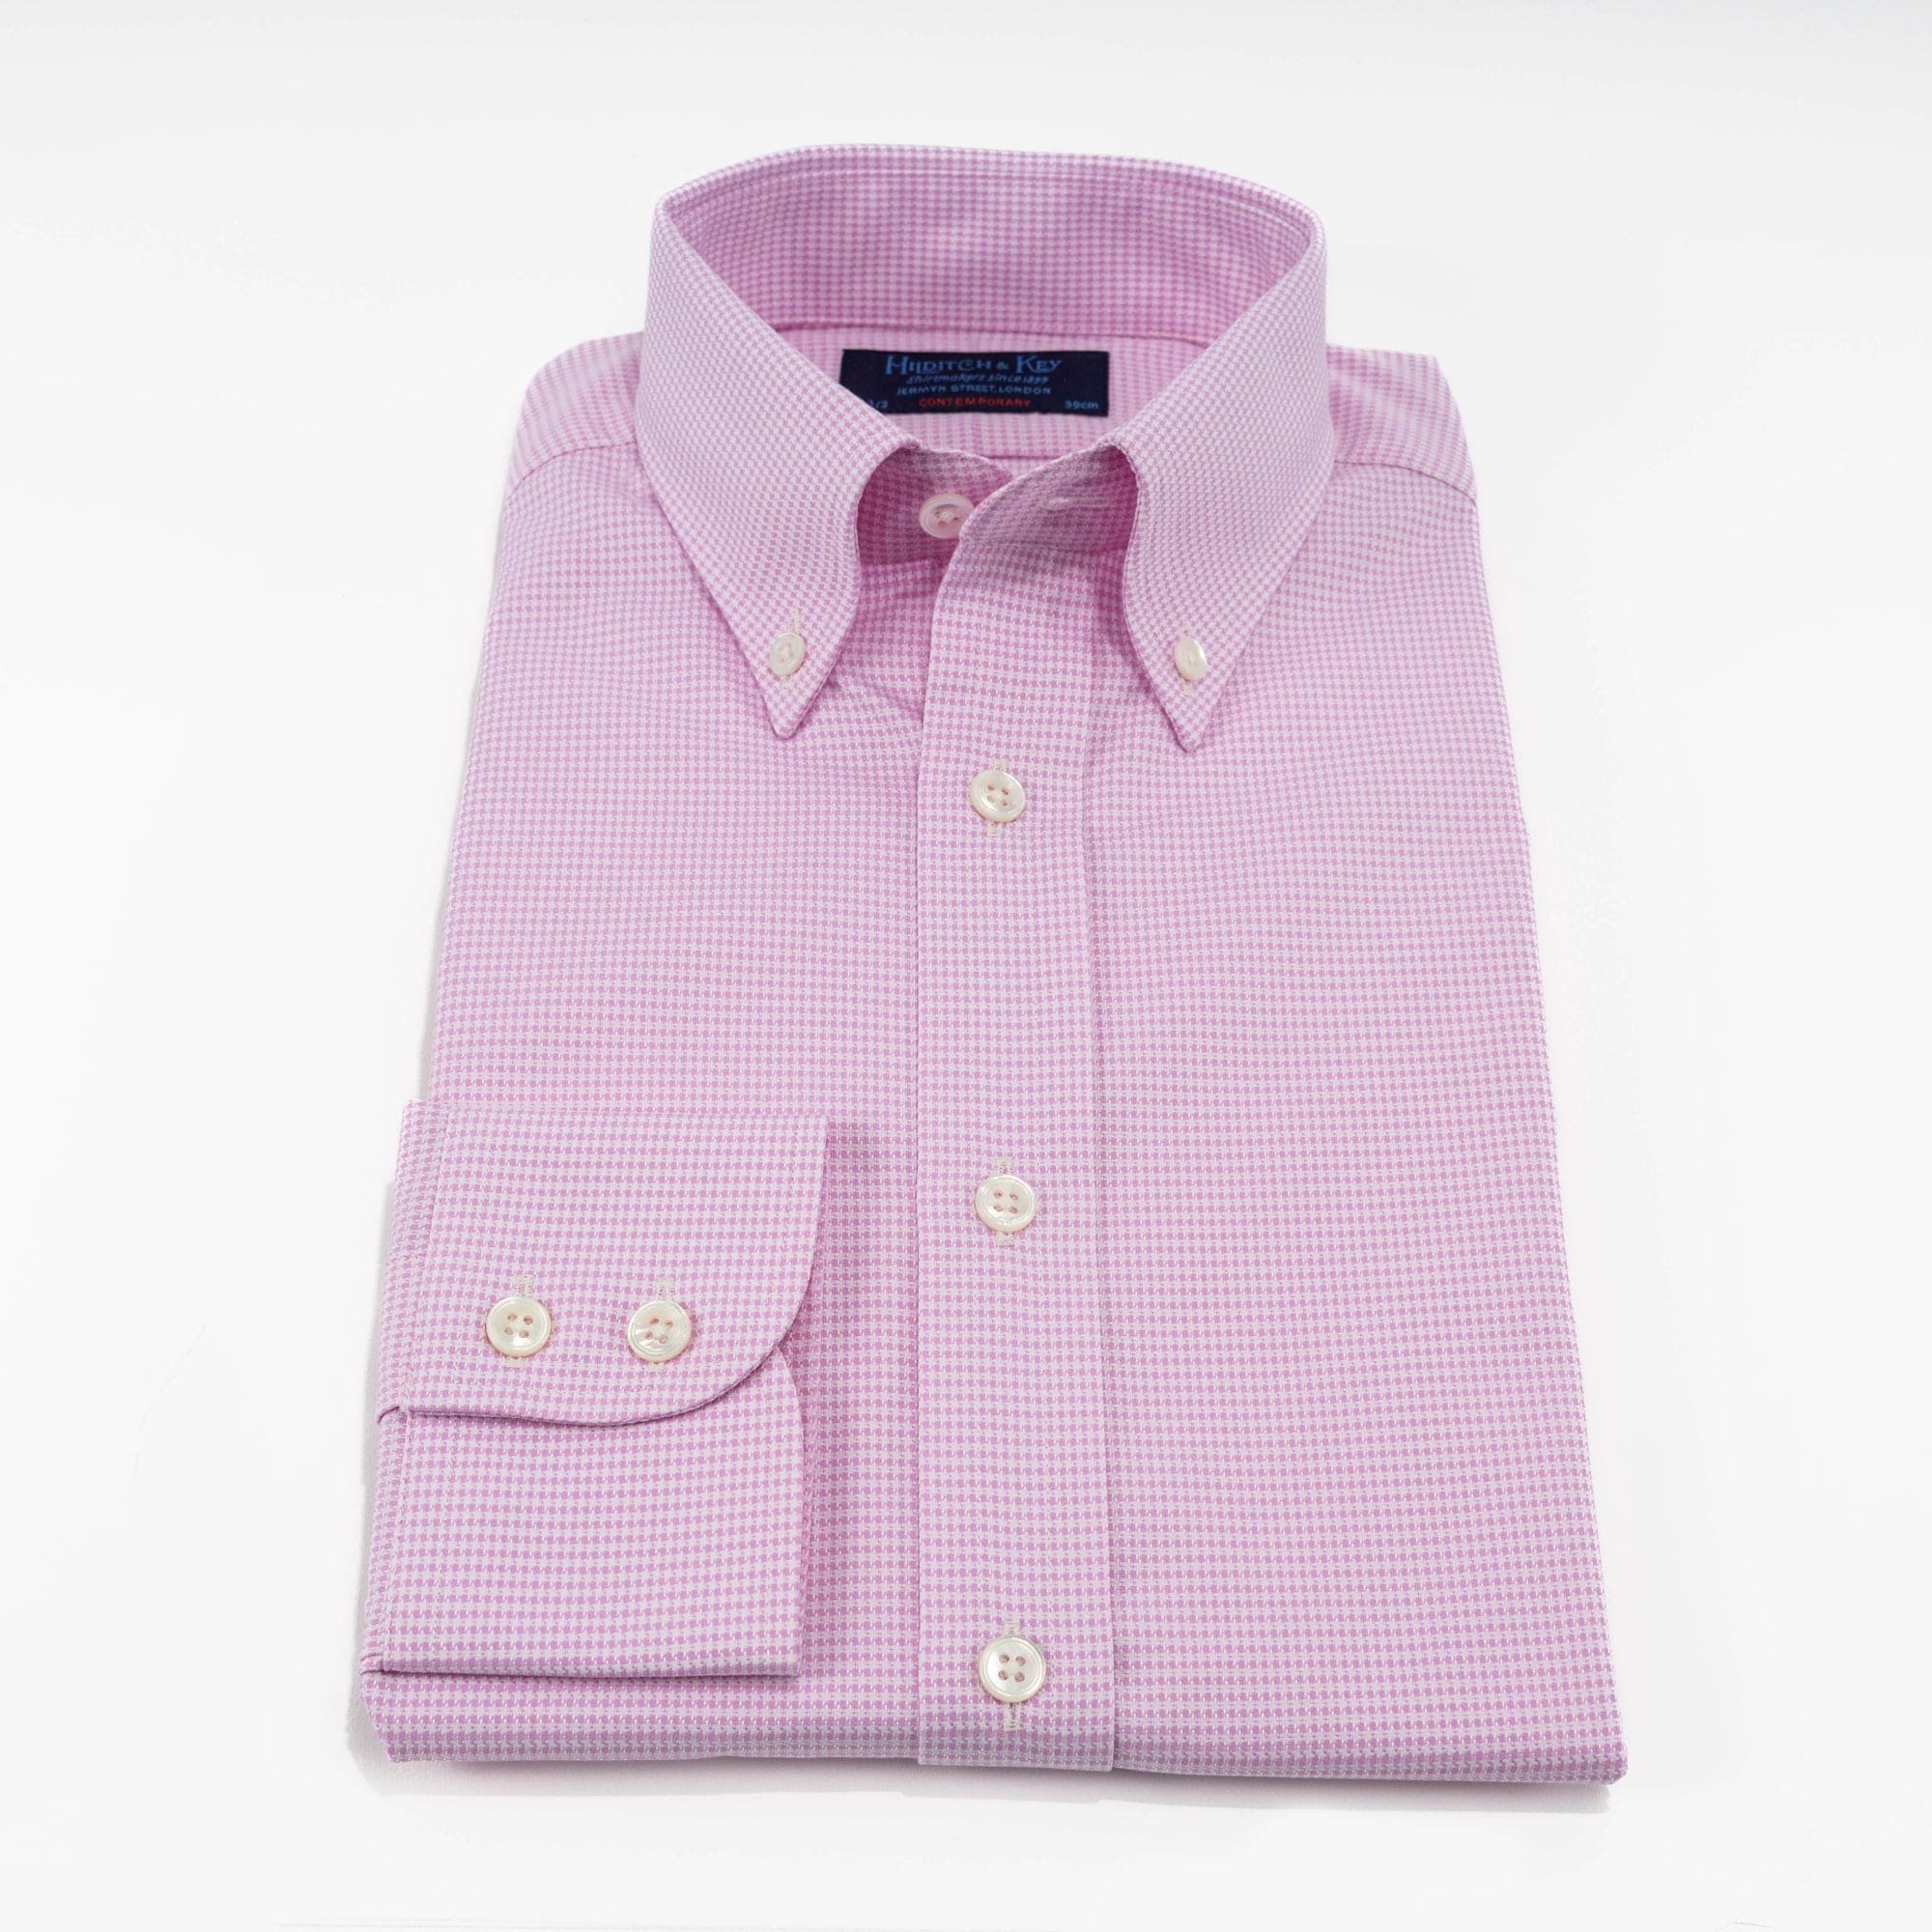 Contemporary Fit, Button Down Collar, 2 Button Cuff Shirt in a Pink & White Micro Houndstooth